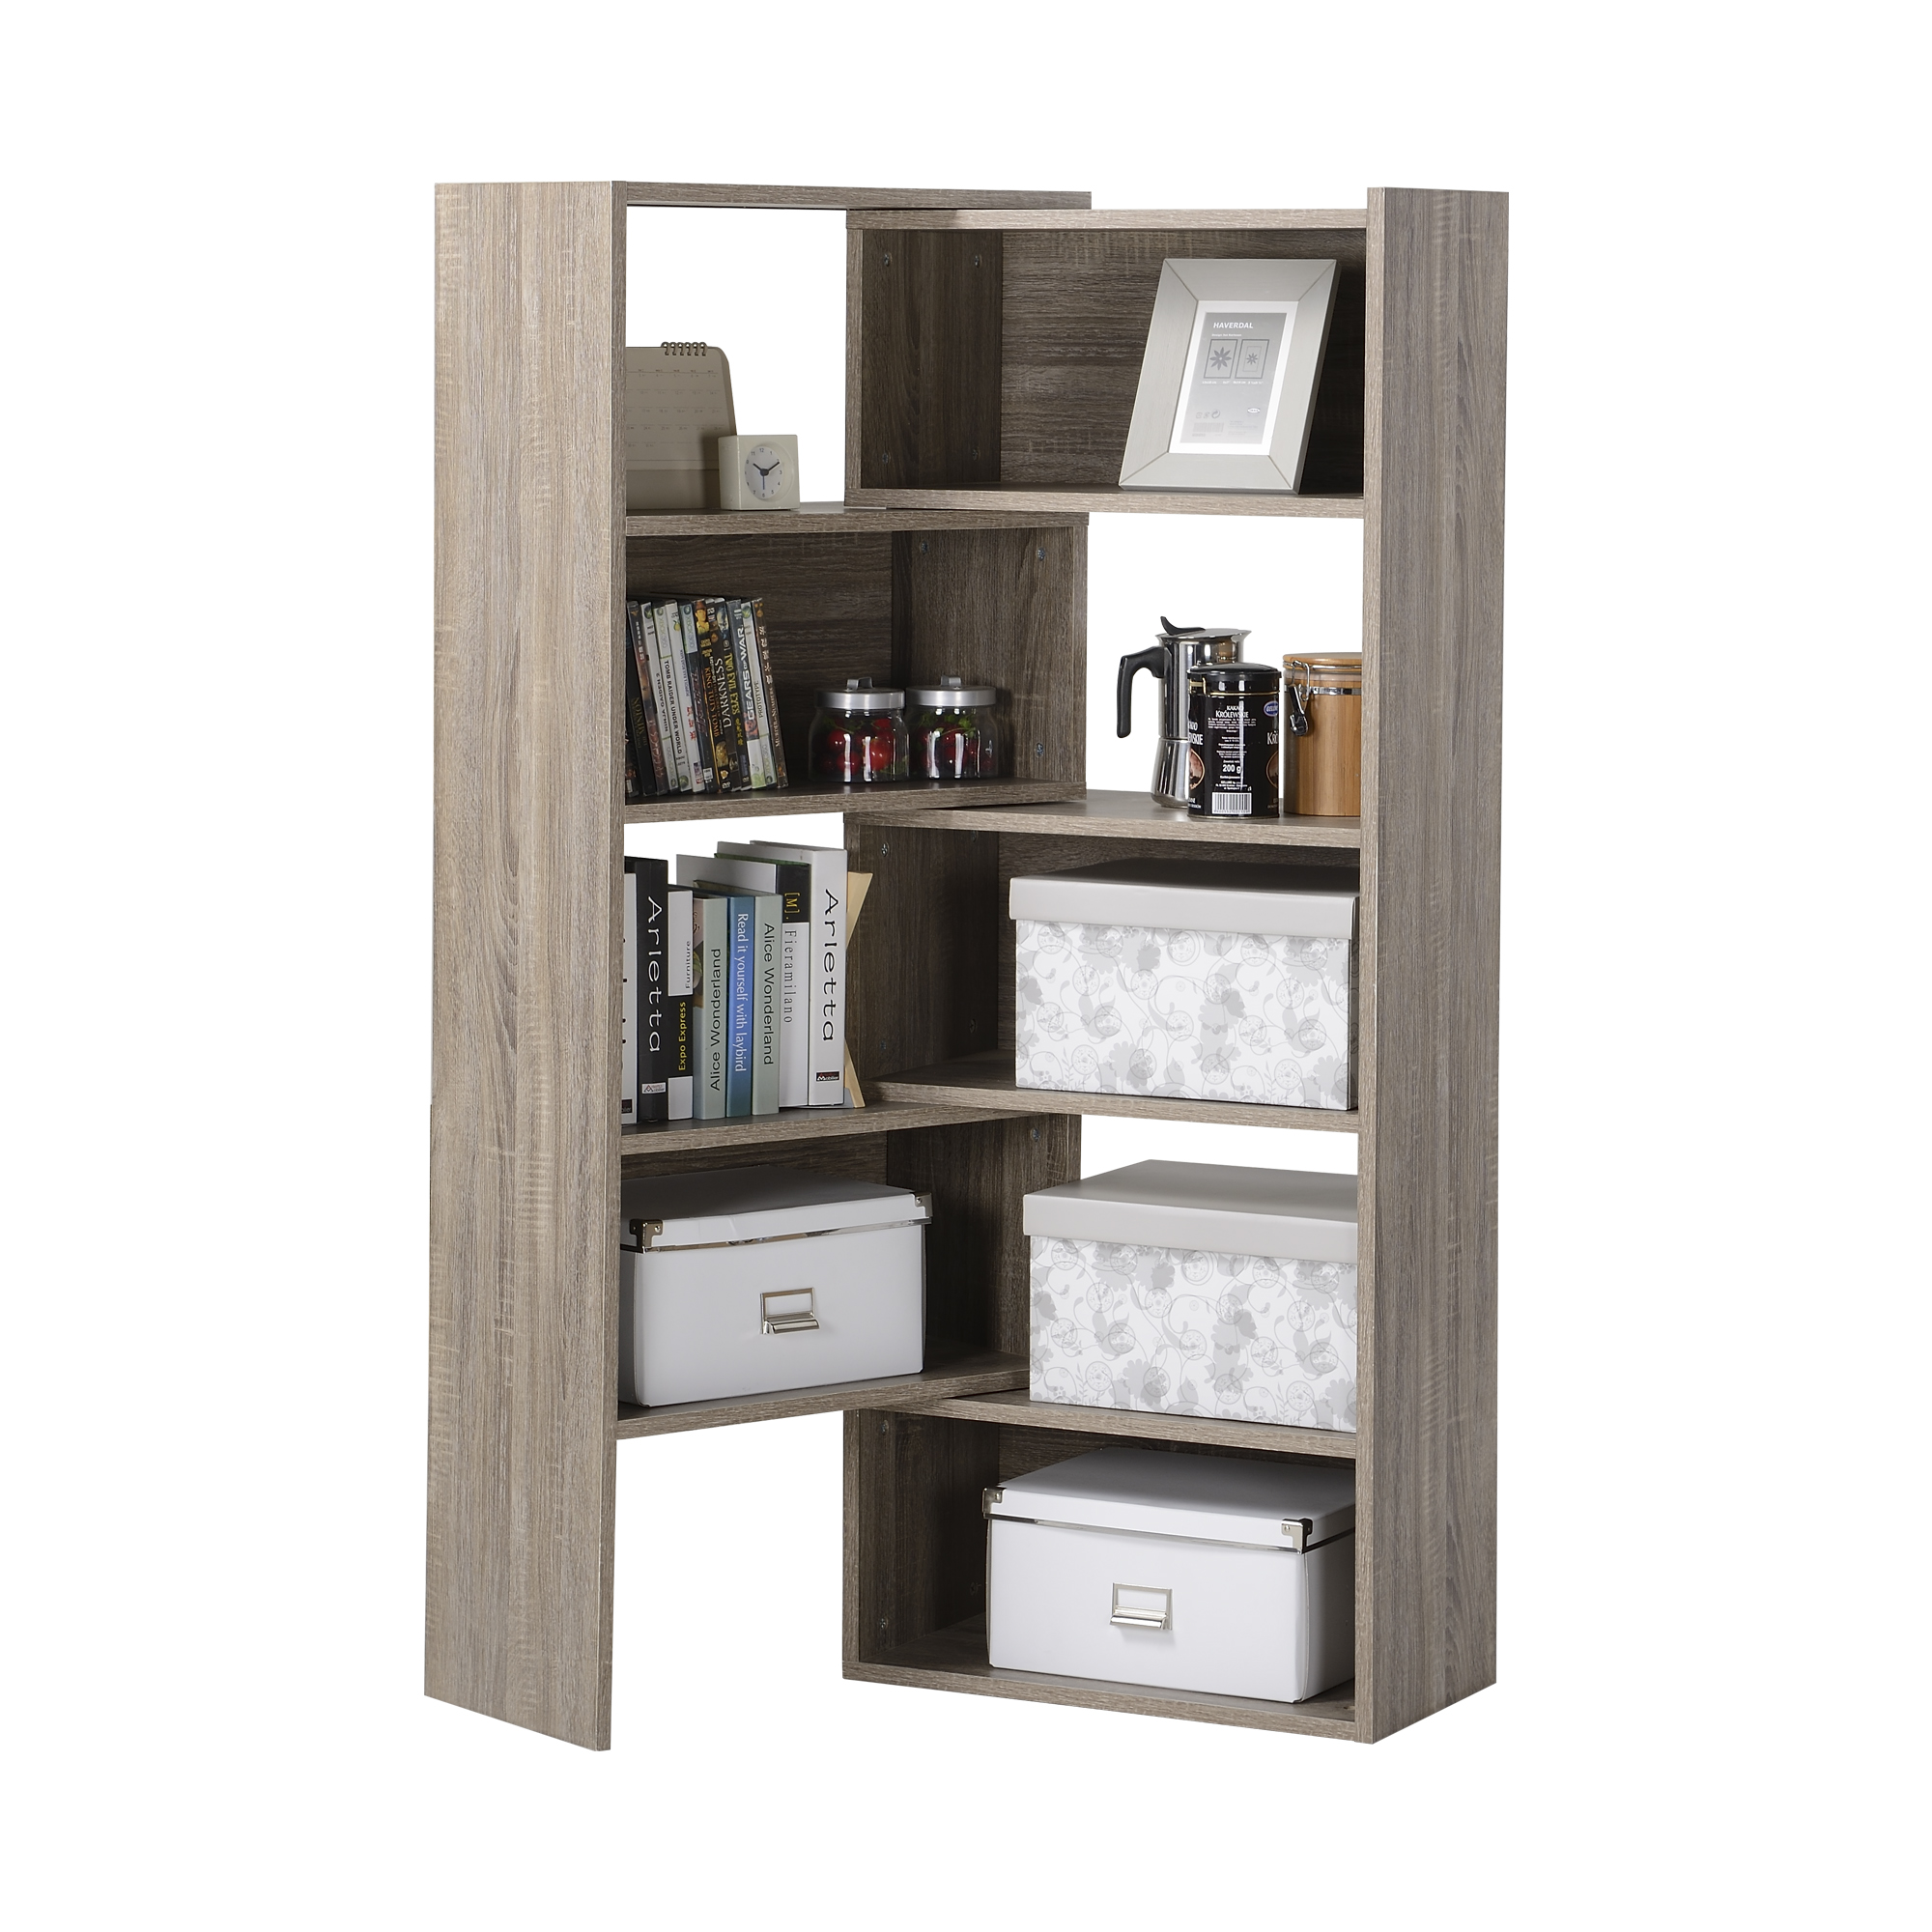 Homestar Flexible and Expandable Shelving Console, Reclaimed Wood - image 1 of 7